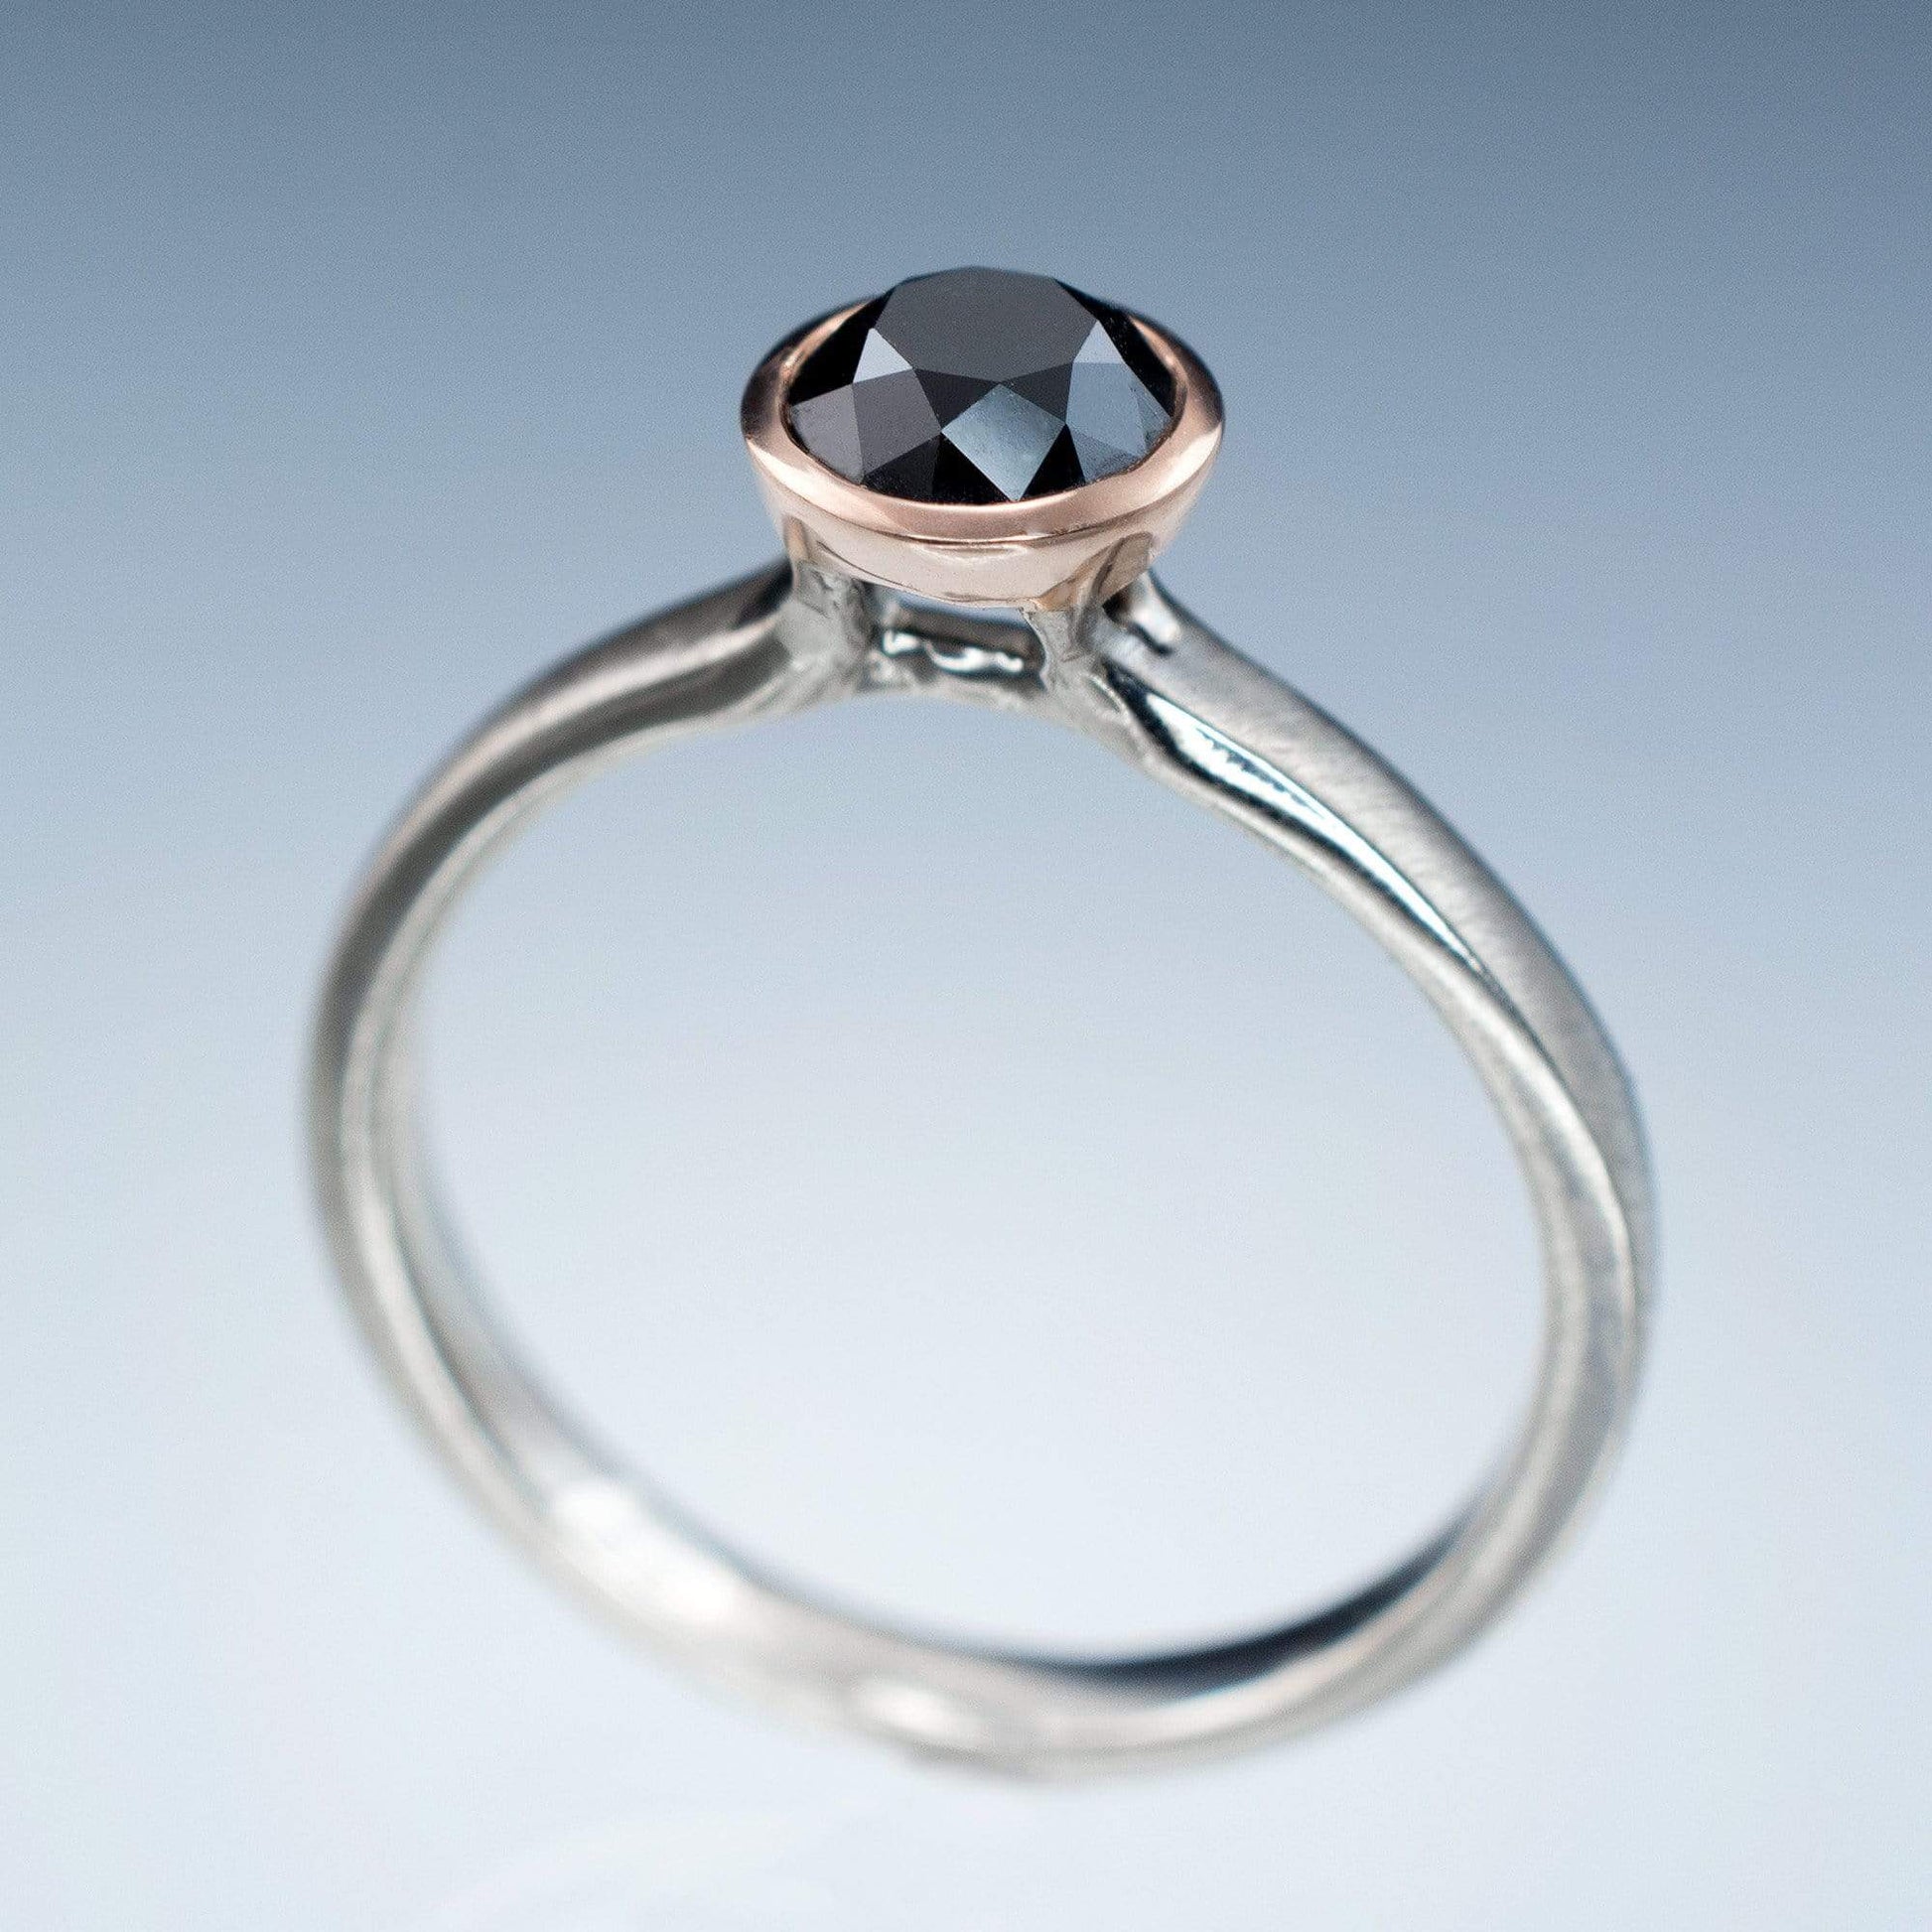 Mixed Metal Black Diamond Bezel Solitaire Engagement Ring Ring by Nodeform